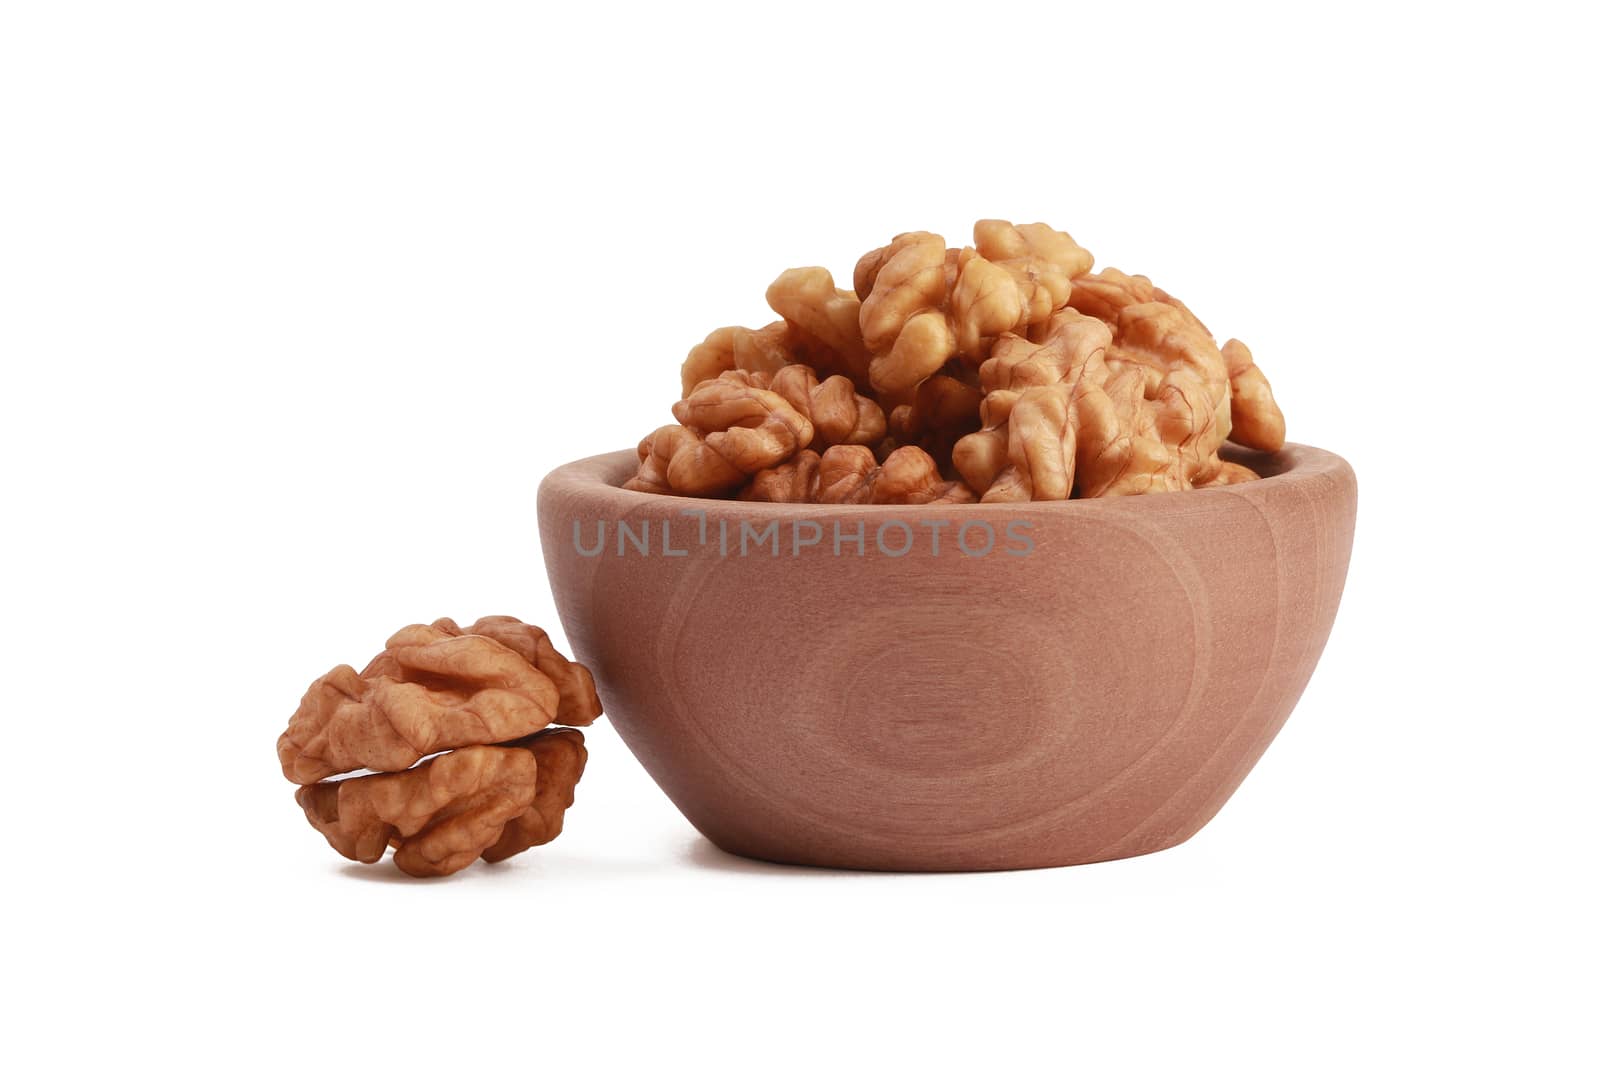 Walnuts shelled in a bowl isolated on white background. Side view. Walnut kernels in a bowl